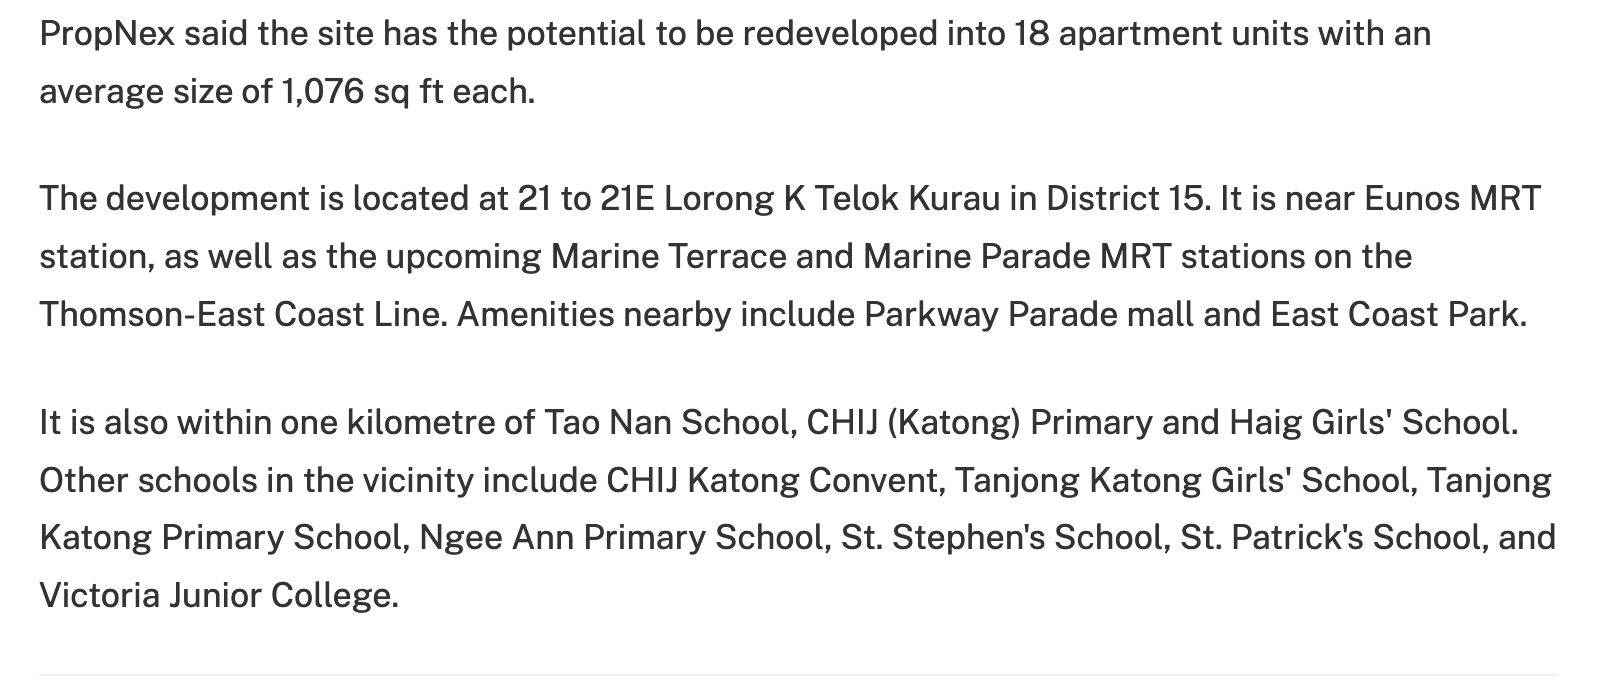 Ji-Liang-Gardens-in-Marine-Parade-up-for-collective-sale-with-S$18.6m-reserve-price-4